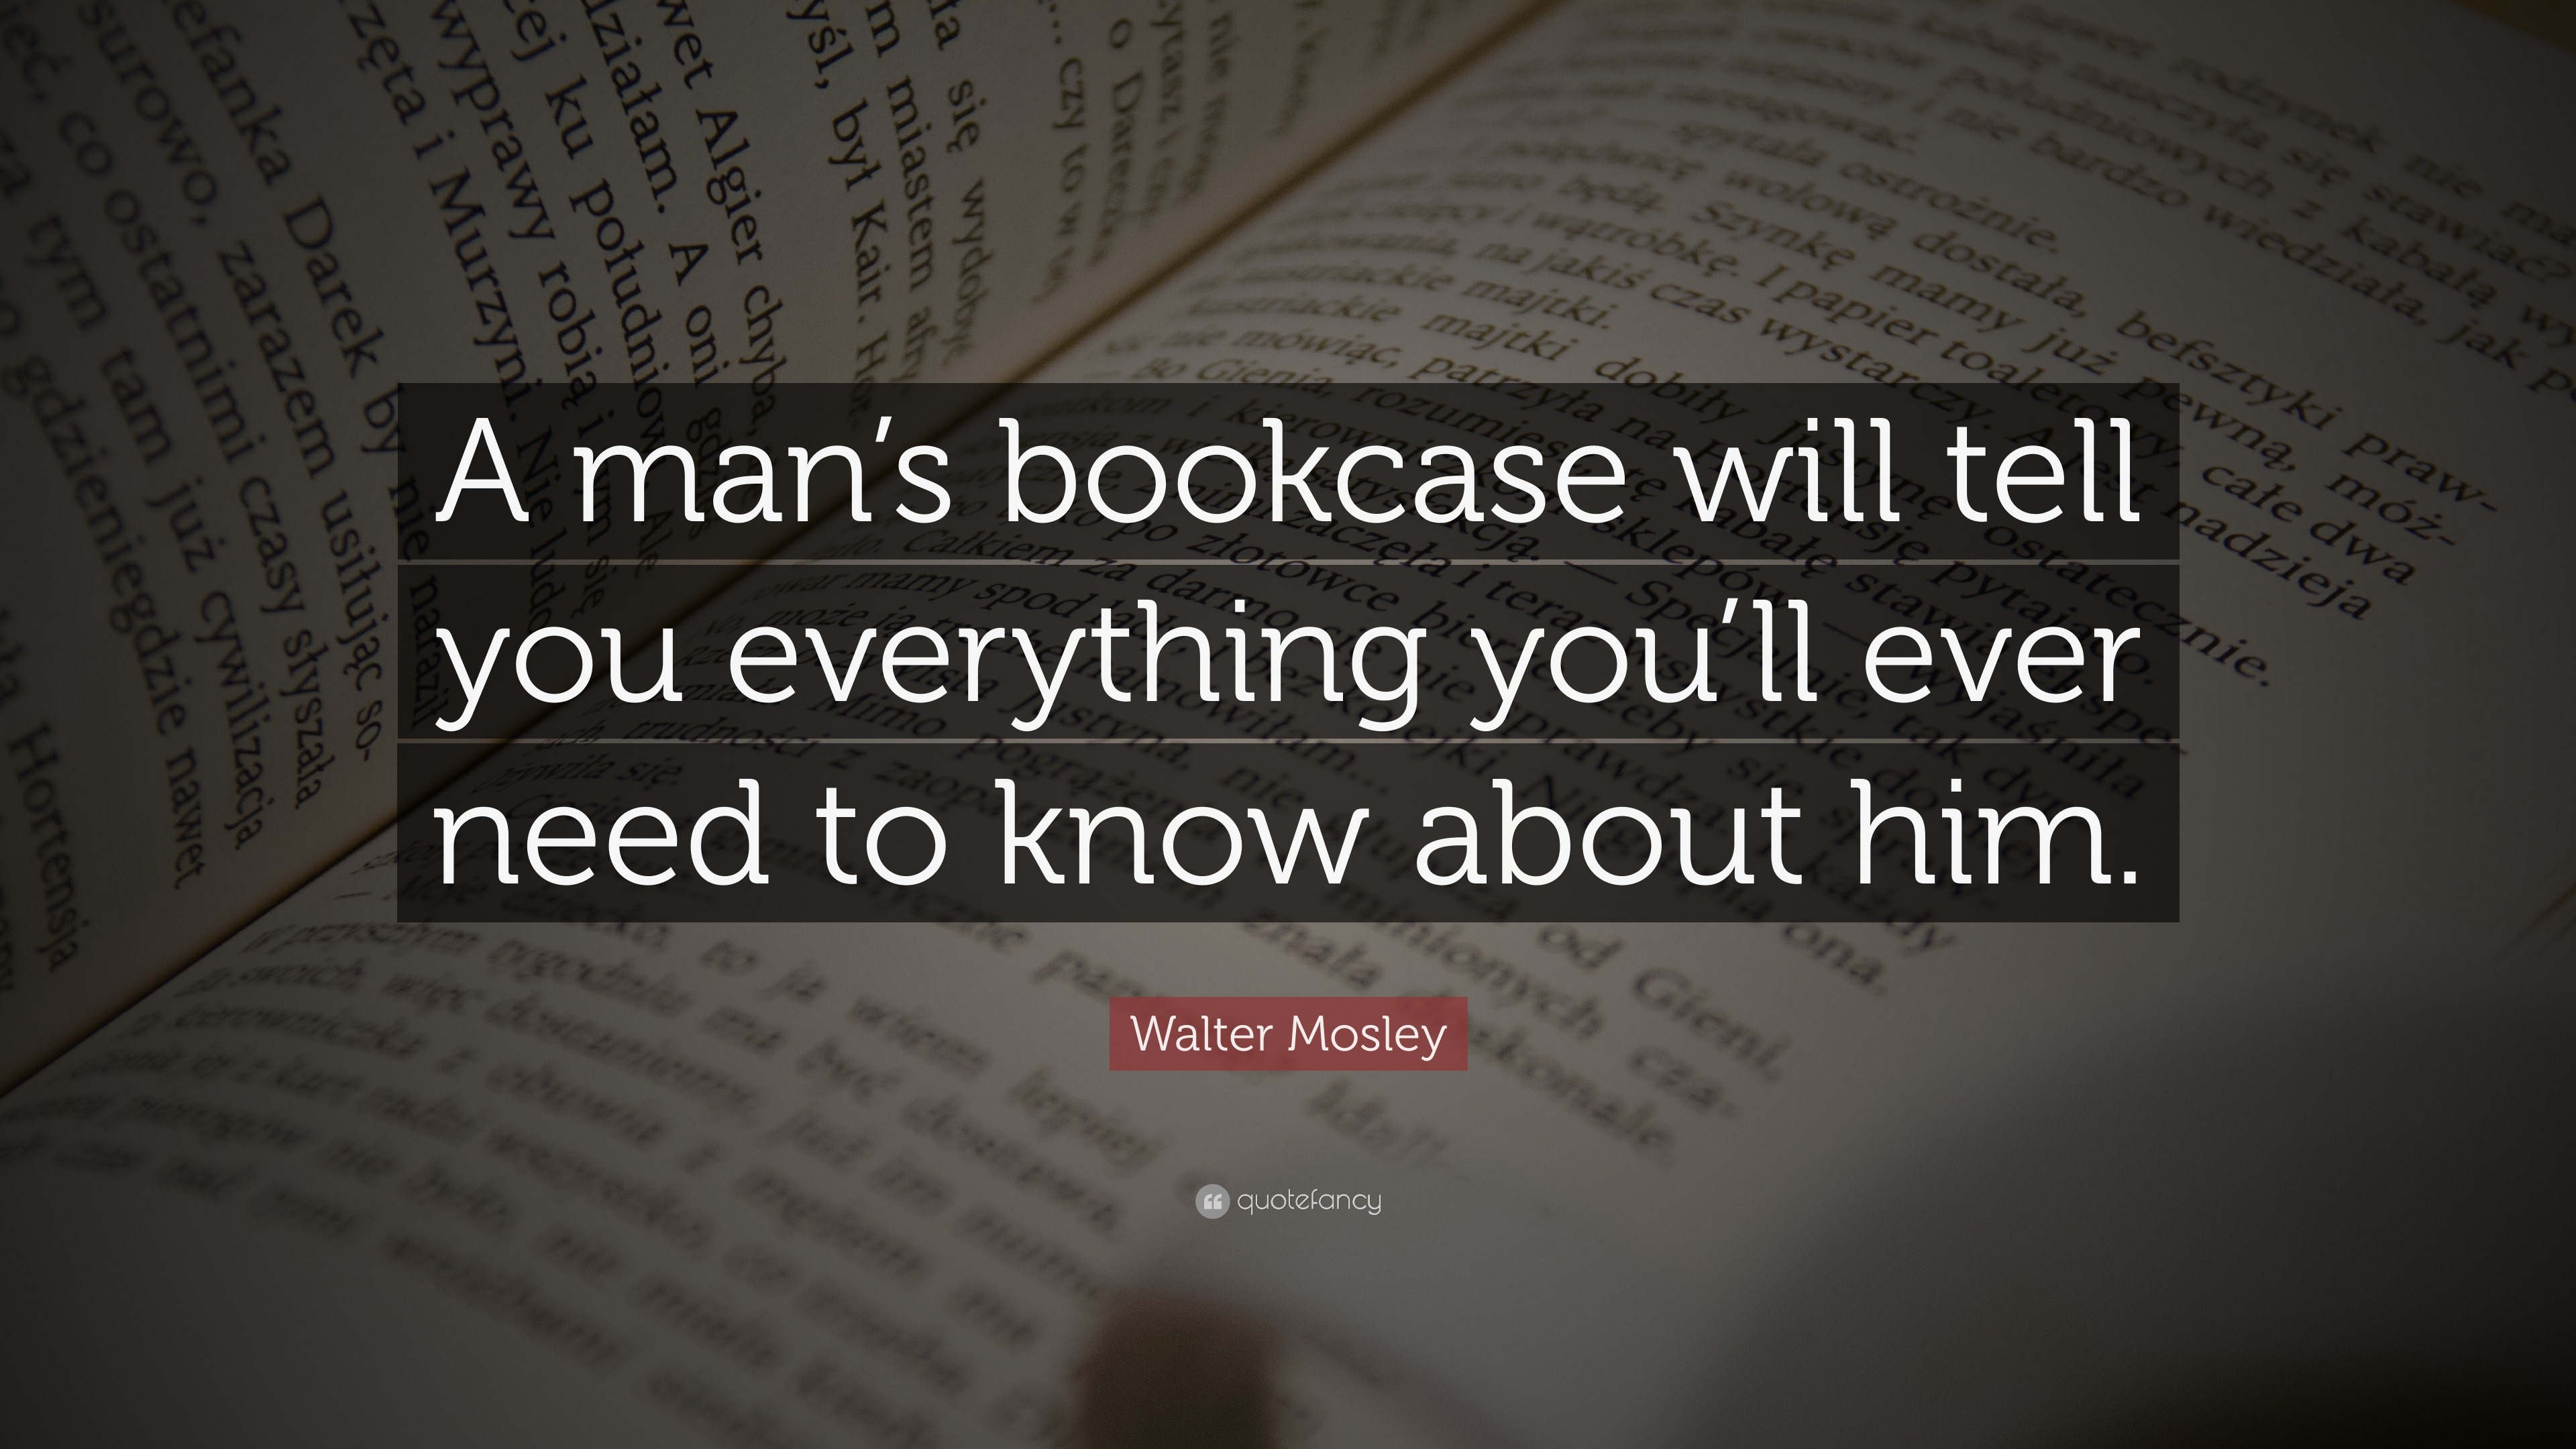 Walter Mosley Quote: “A man’s bookcase will tell you everything you’ll ...